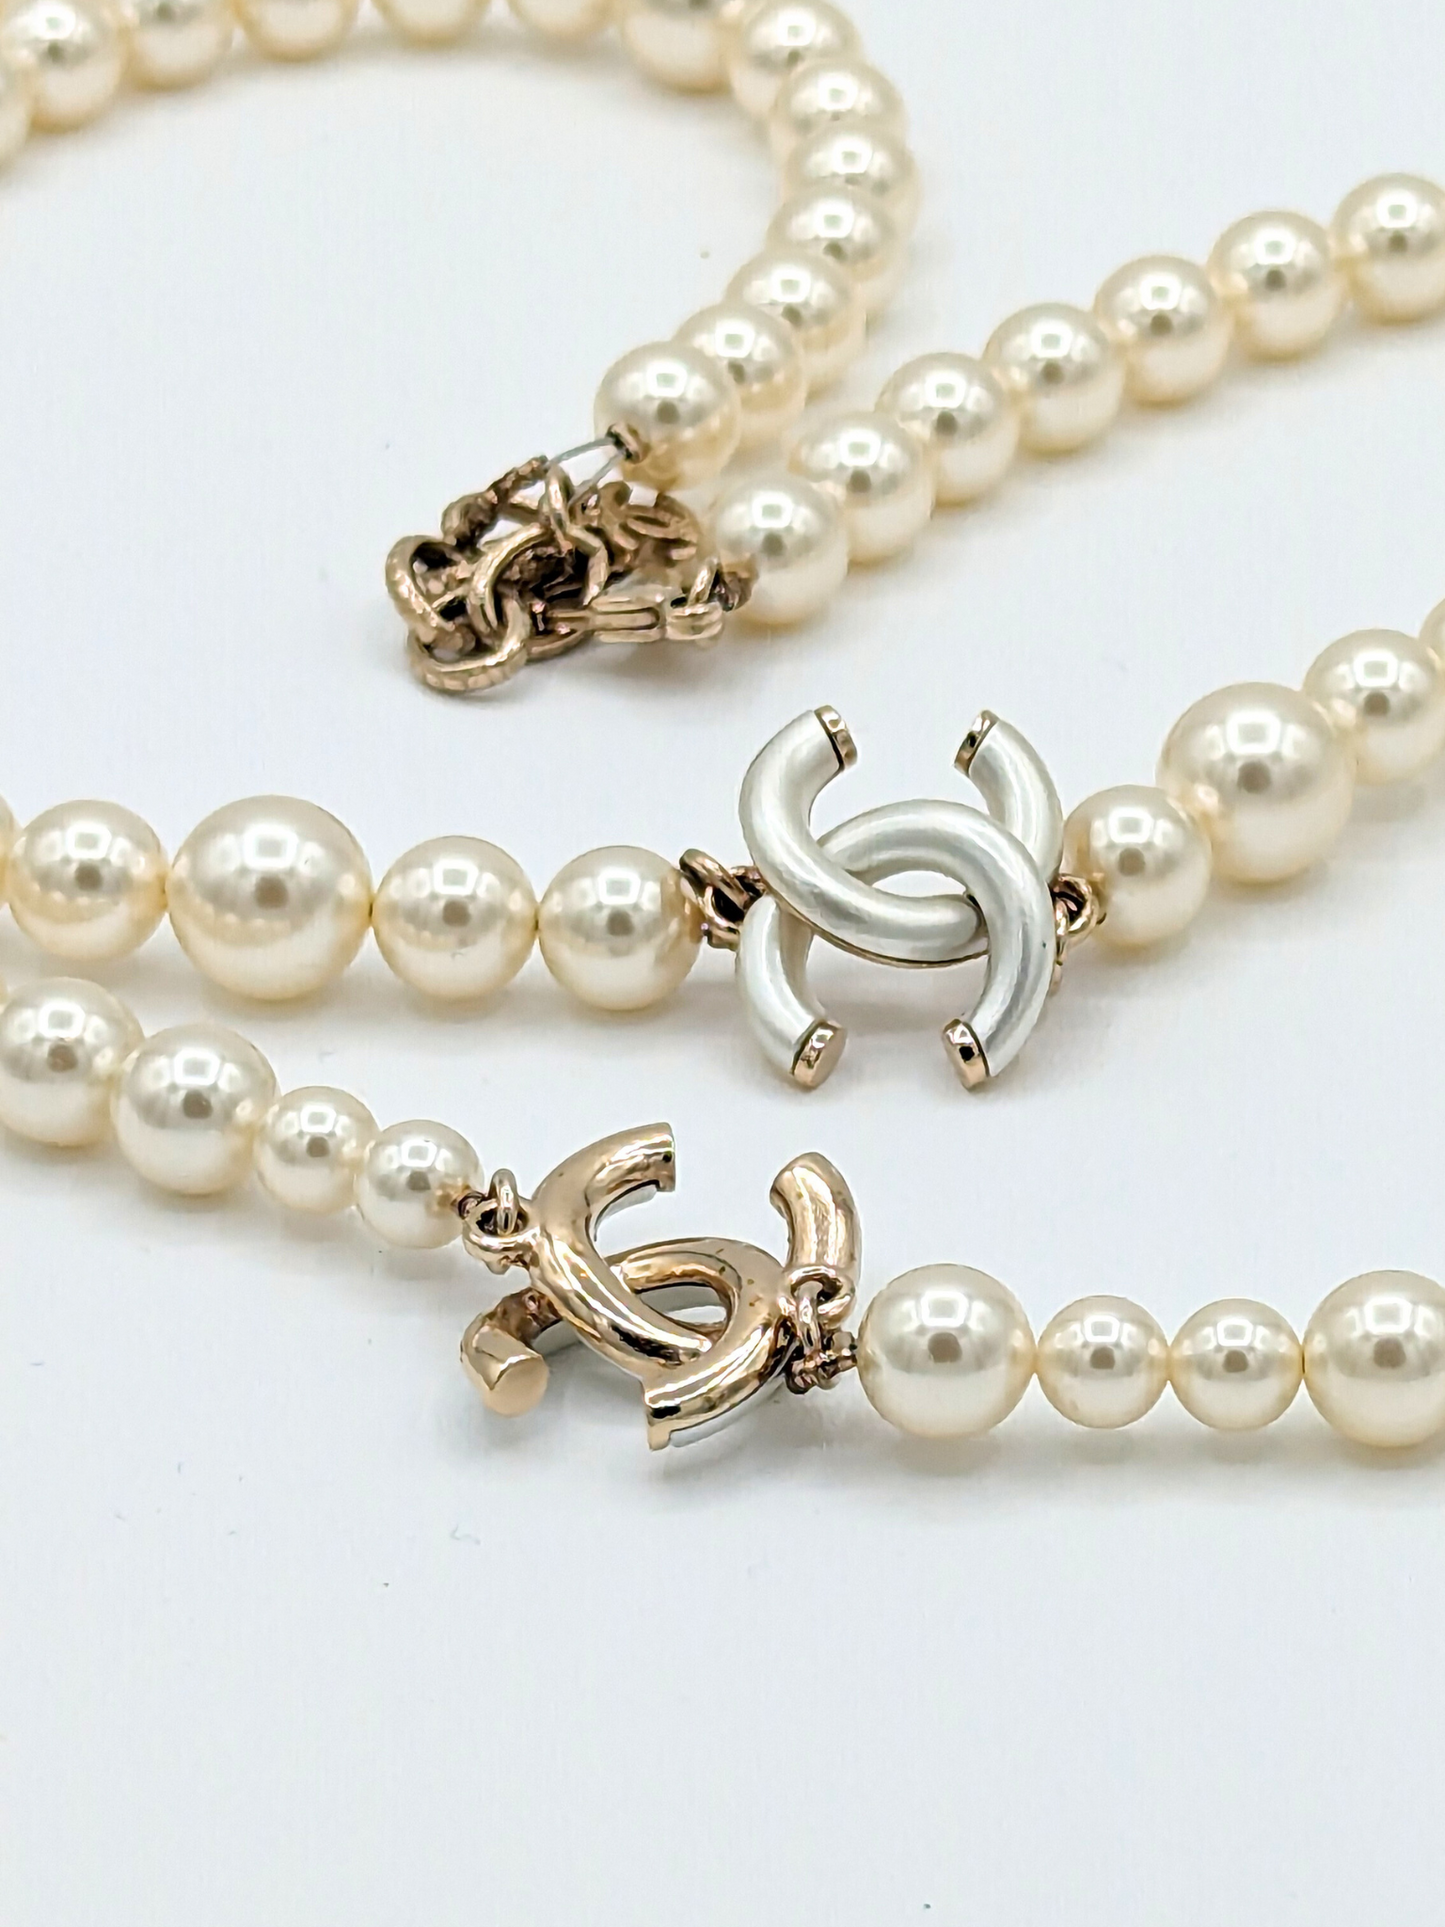 Chanel Gold-Plated Faux Pearl CC long necklace with Box